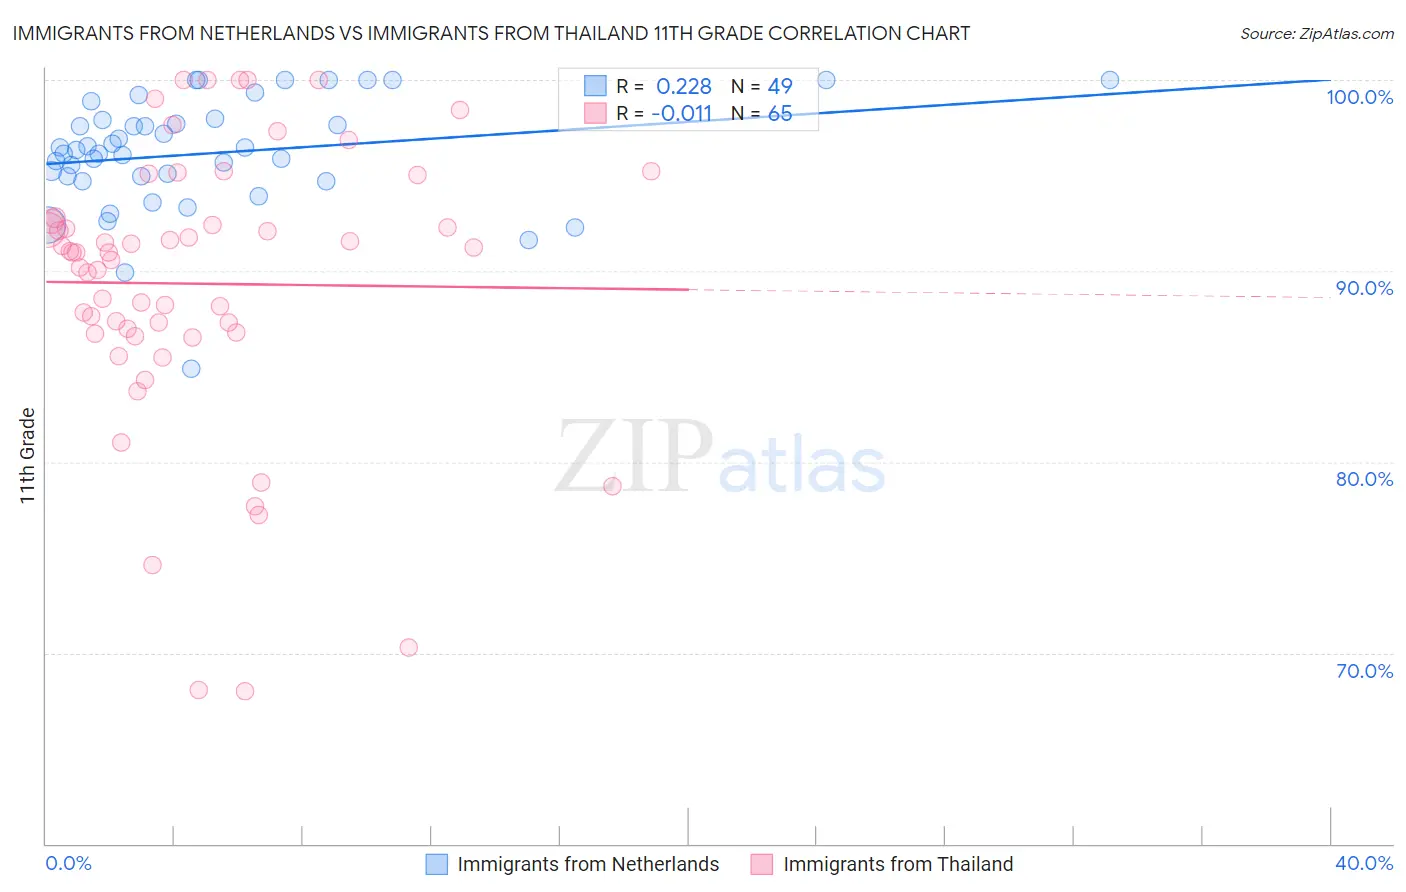 Immigrants from Netherlands vs Immigrants from Thailand 11th Grade